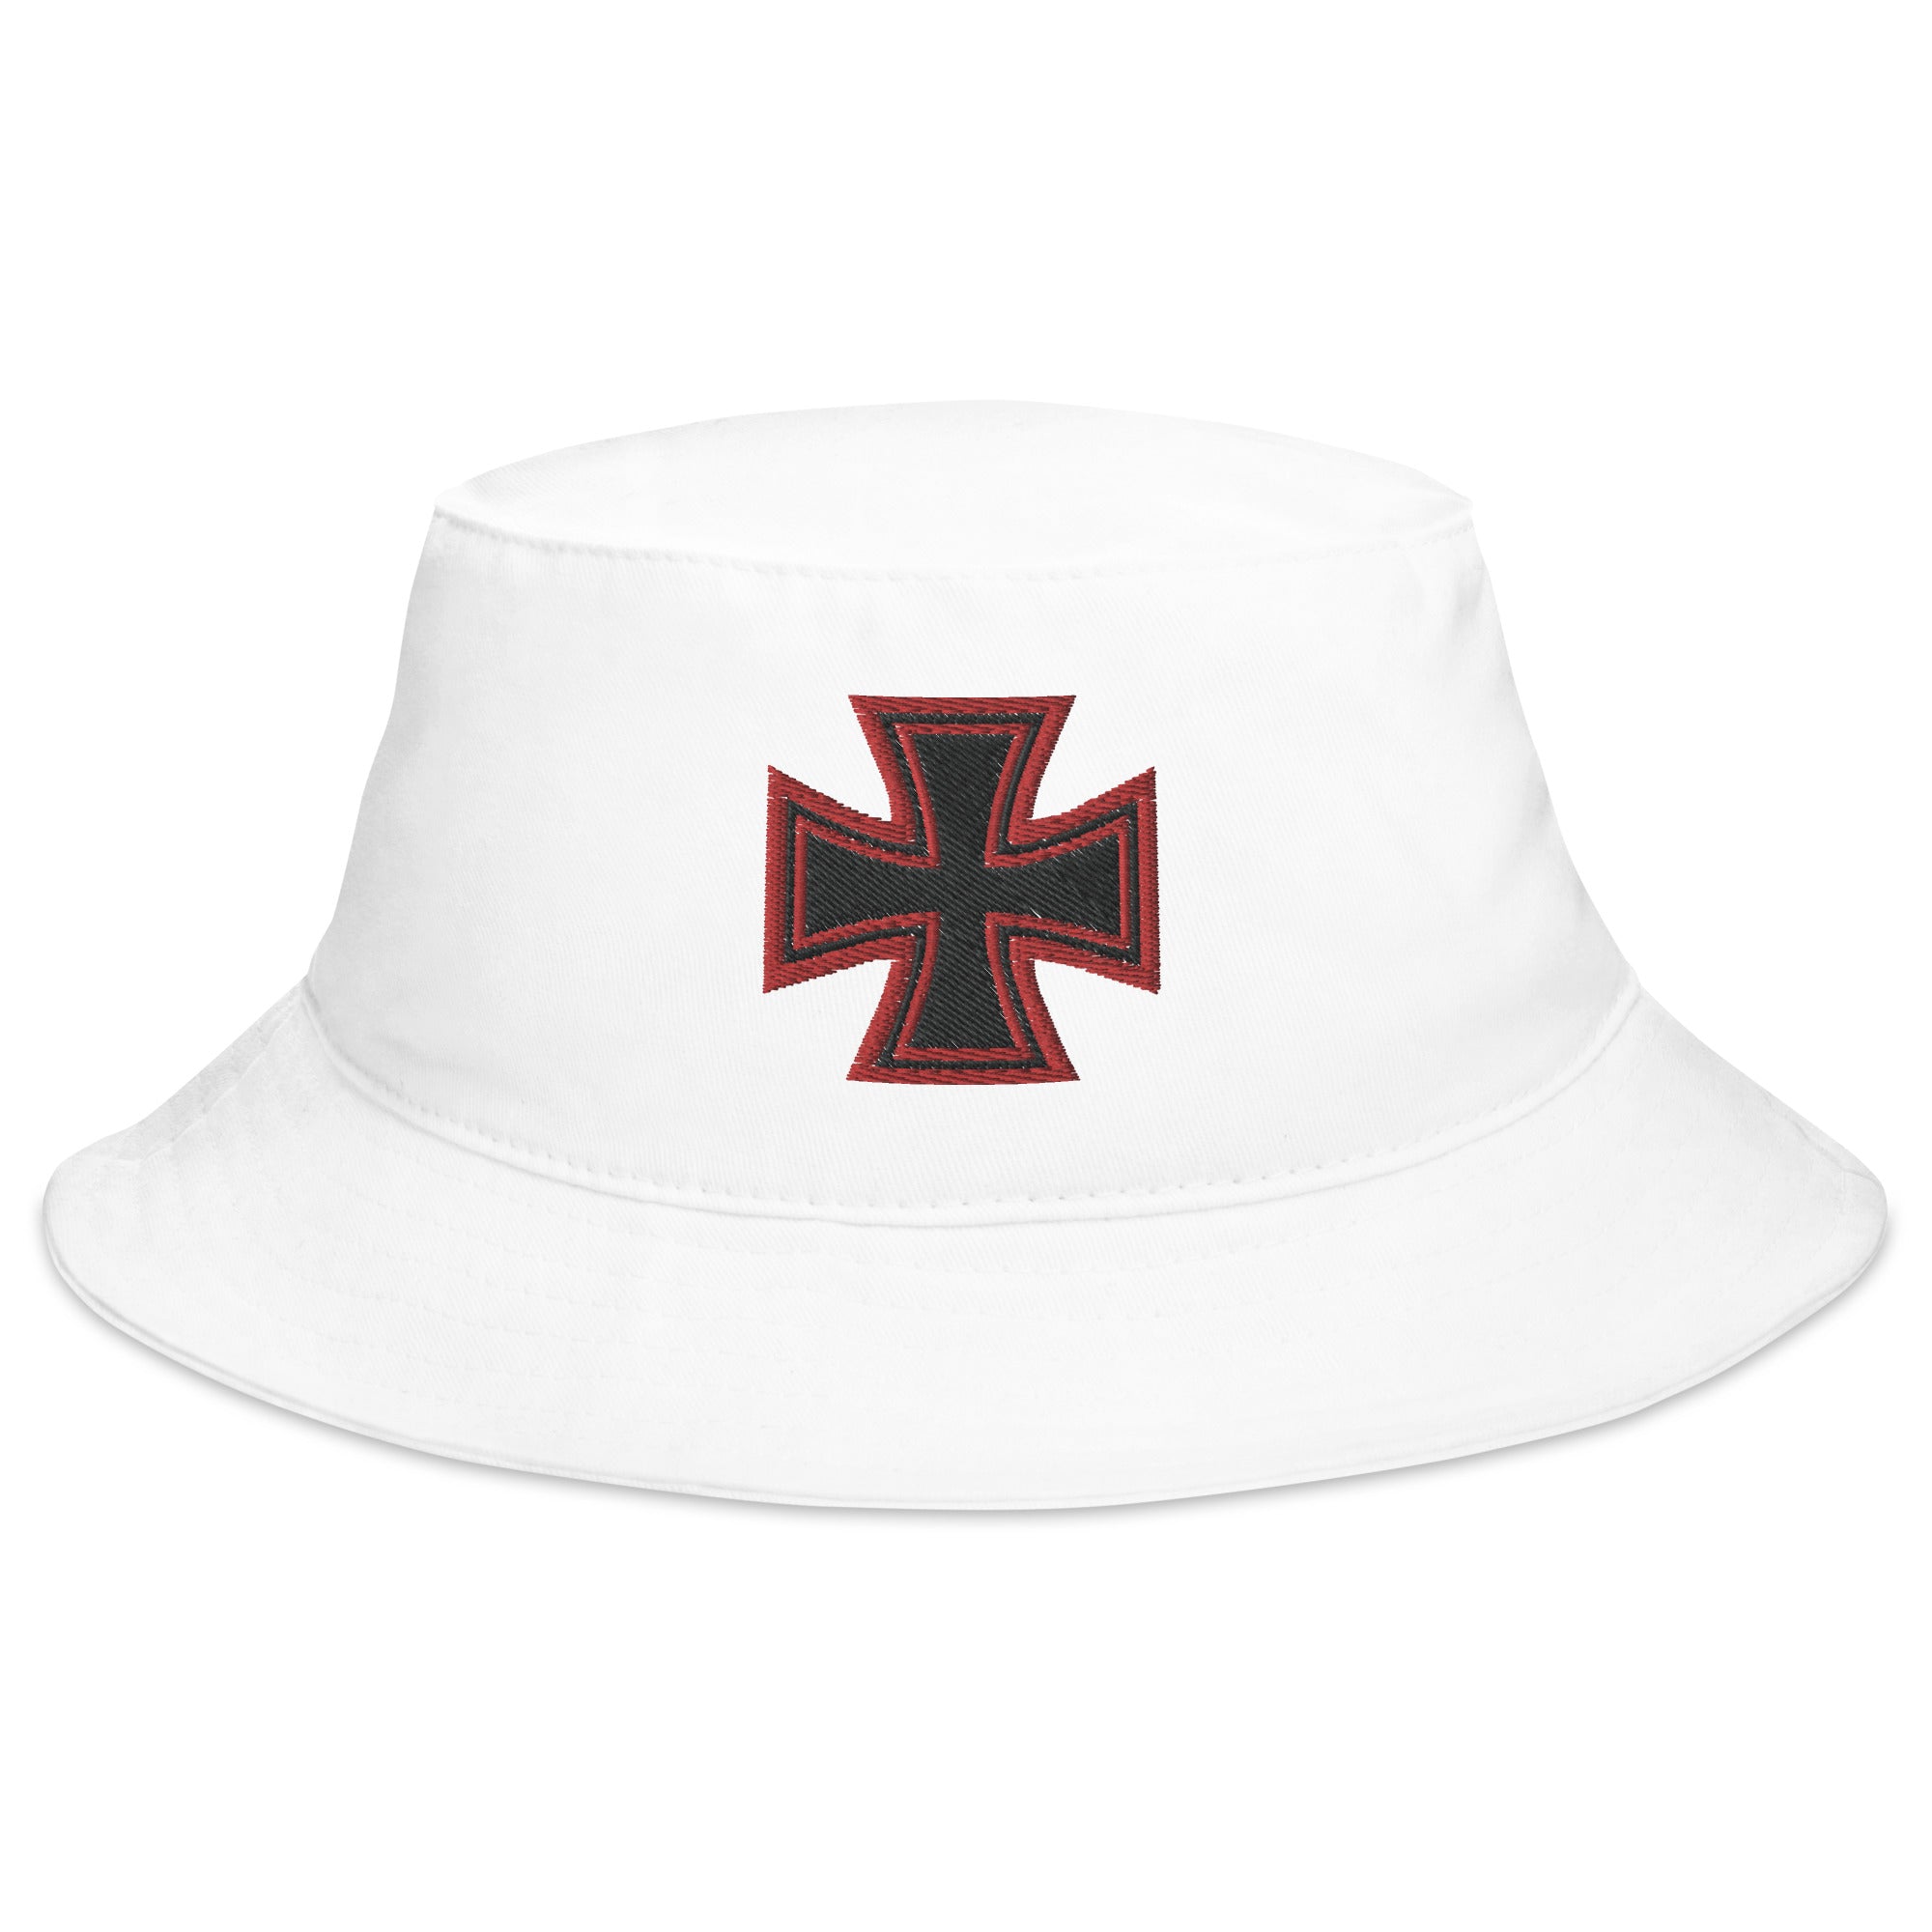 Red Iron Cross Occult Symbol World War II Style Embroidered Bucket Hat